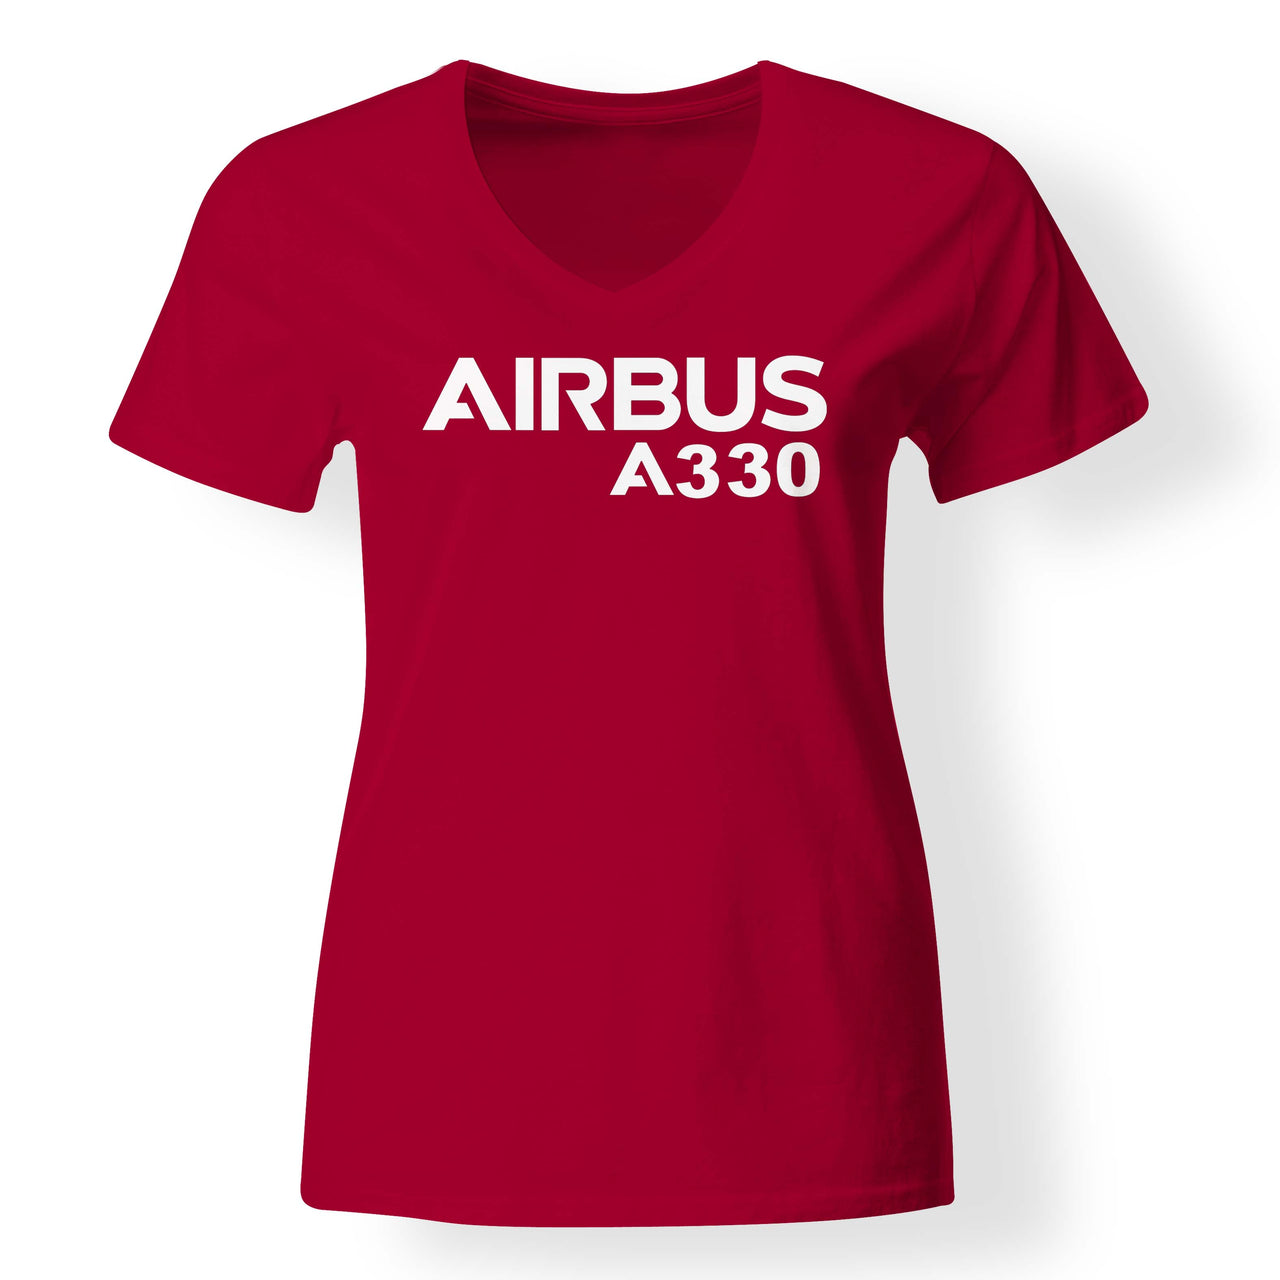 Airbus A330 & Text Designed V-Neck T-Shirts